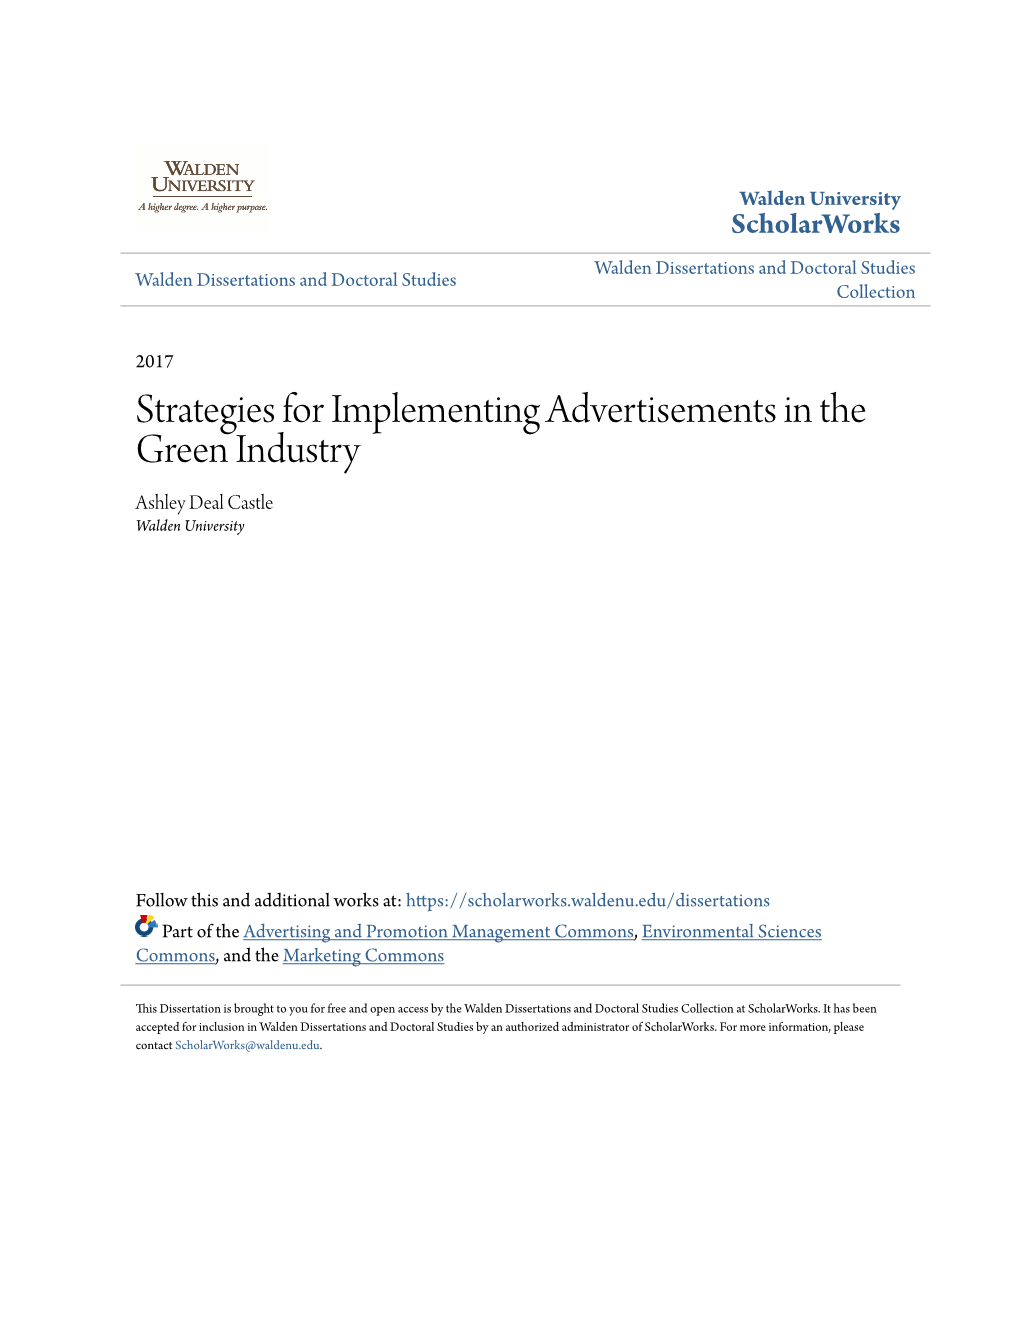 Strategies for Implementing Advertisements in the Green Industry Ashley Deal Castle Walden University